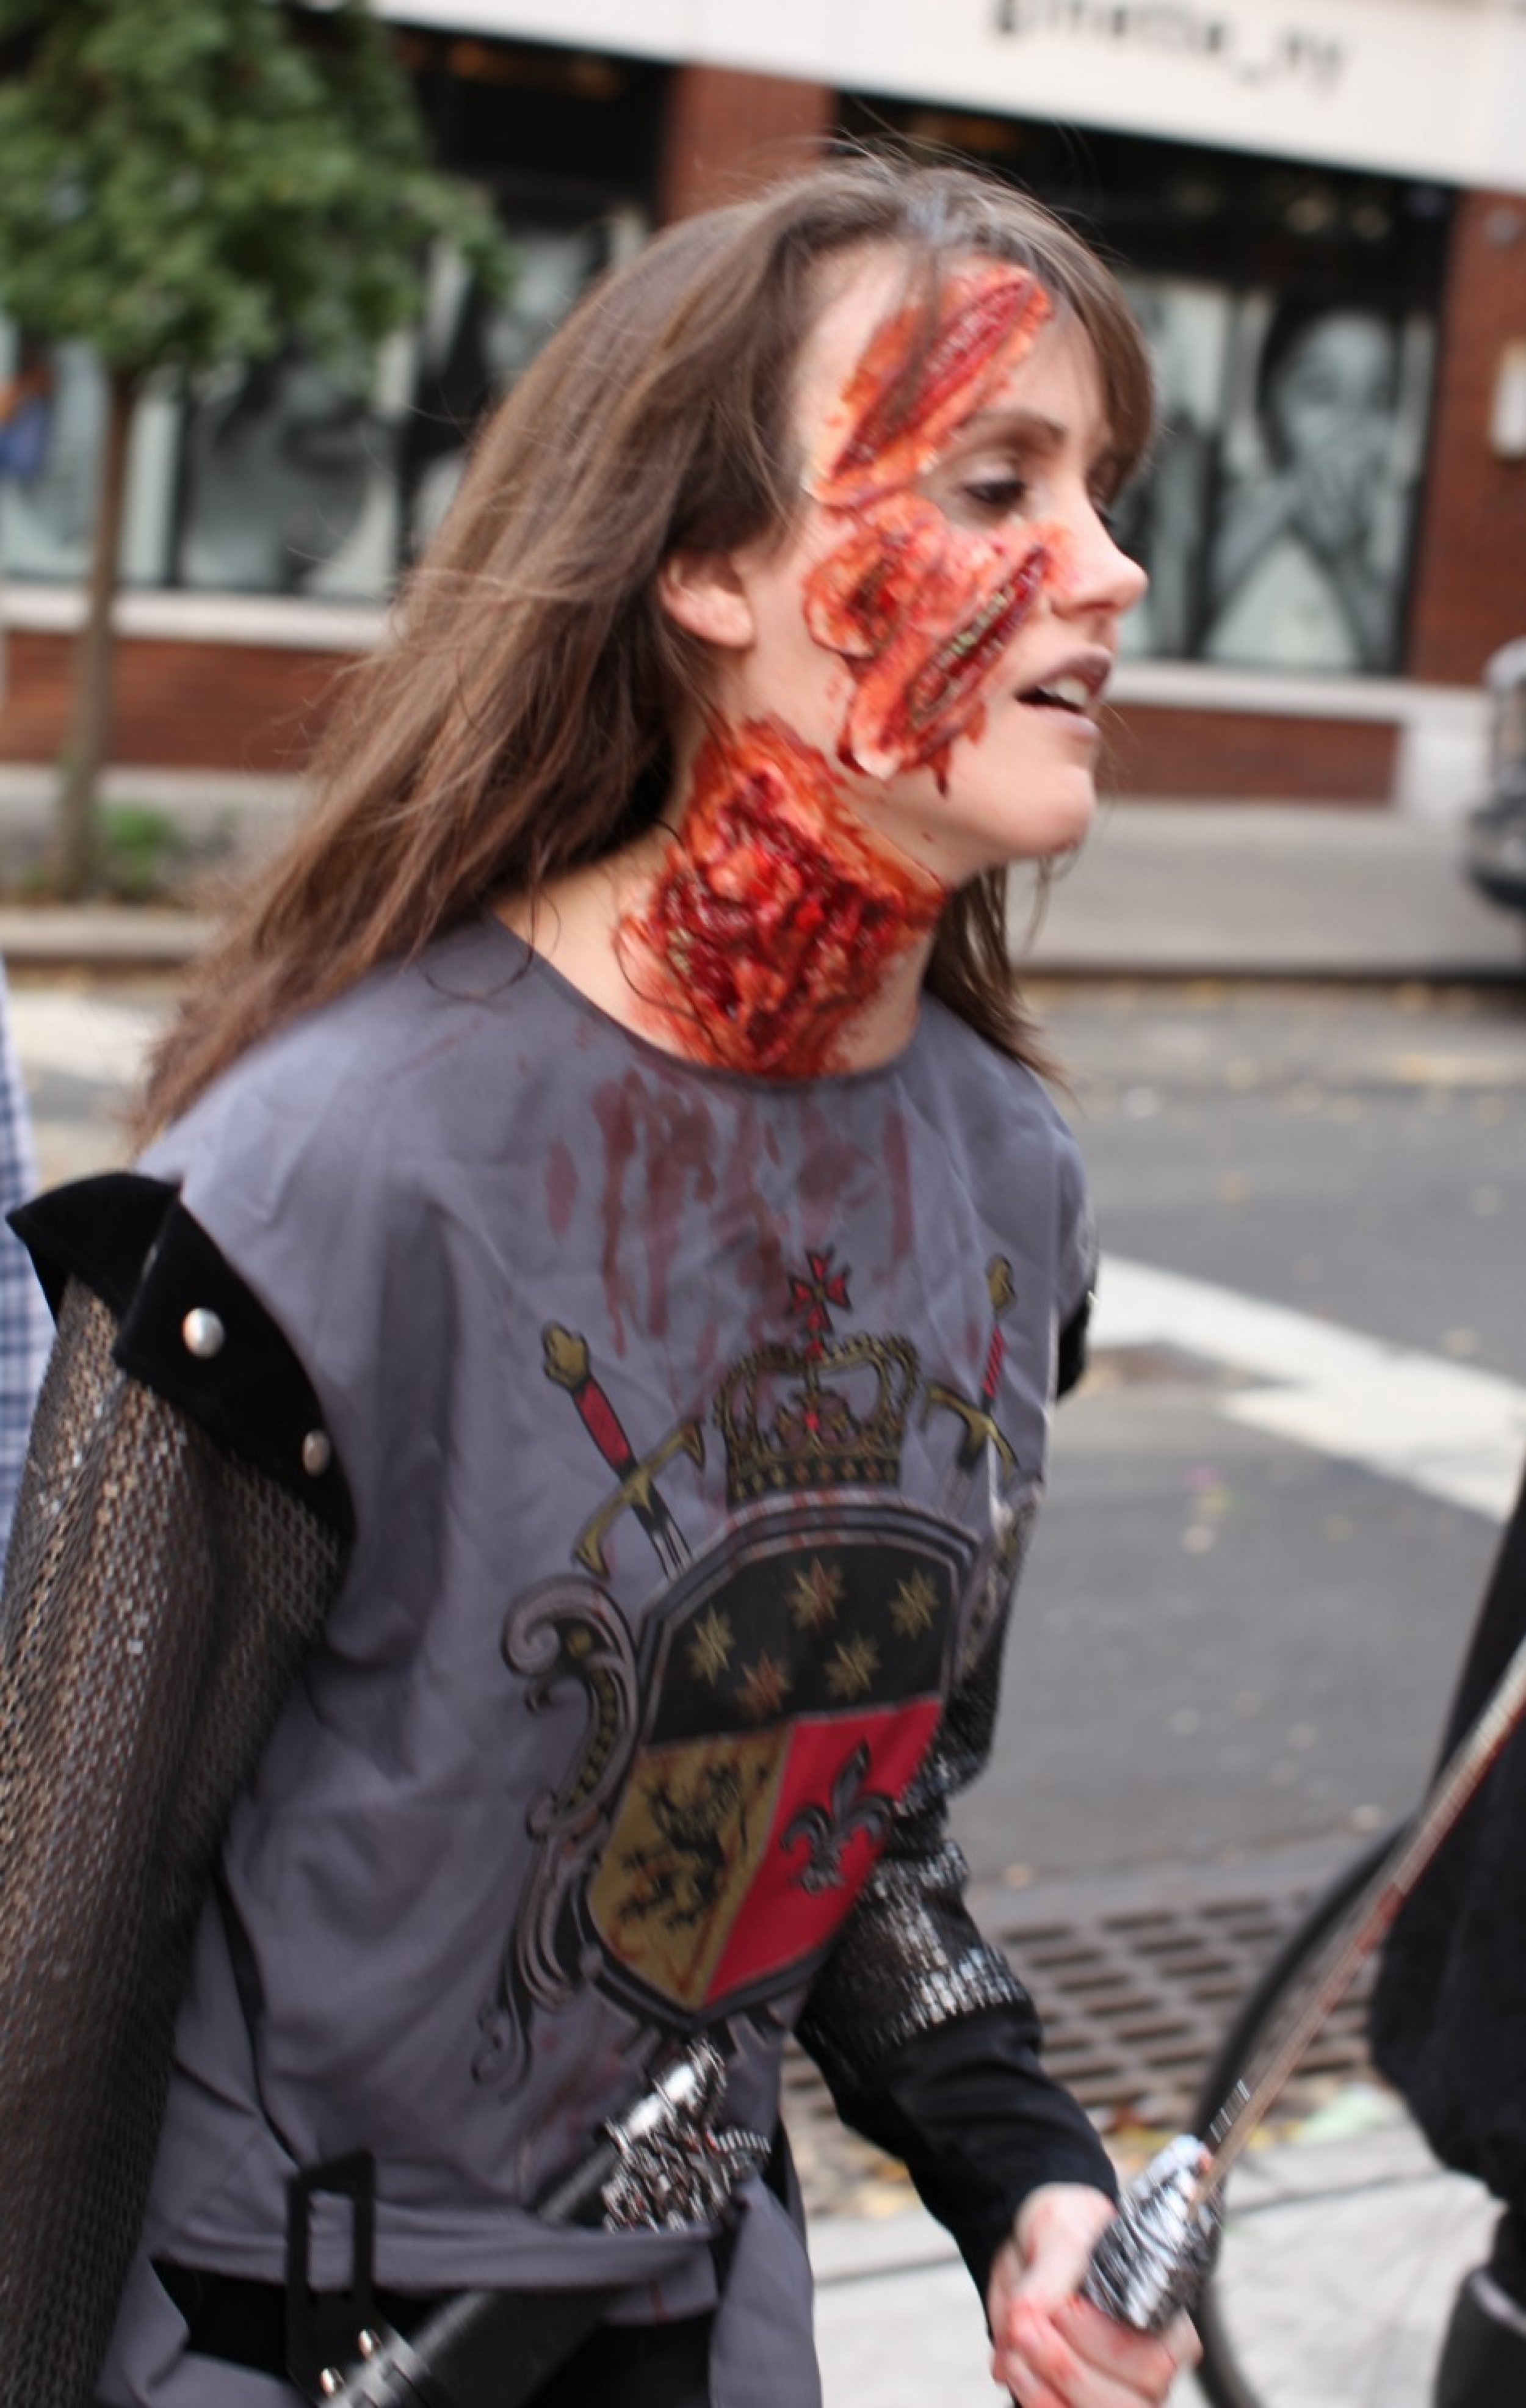 Medieval-themed zombie